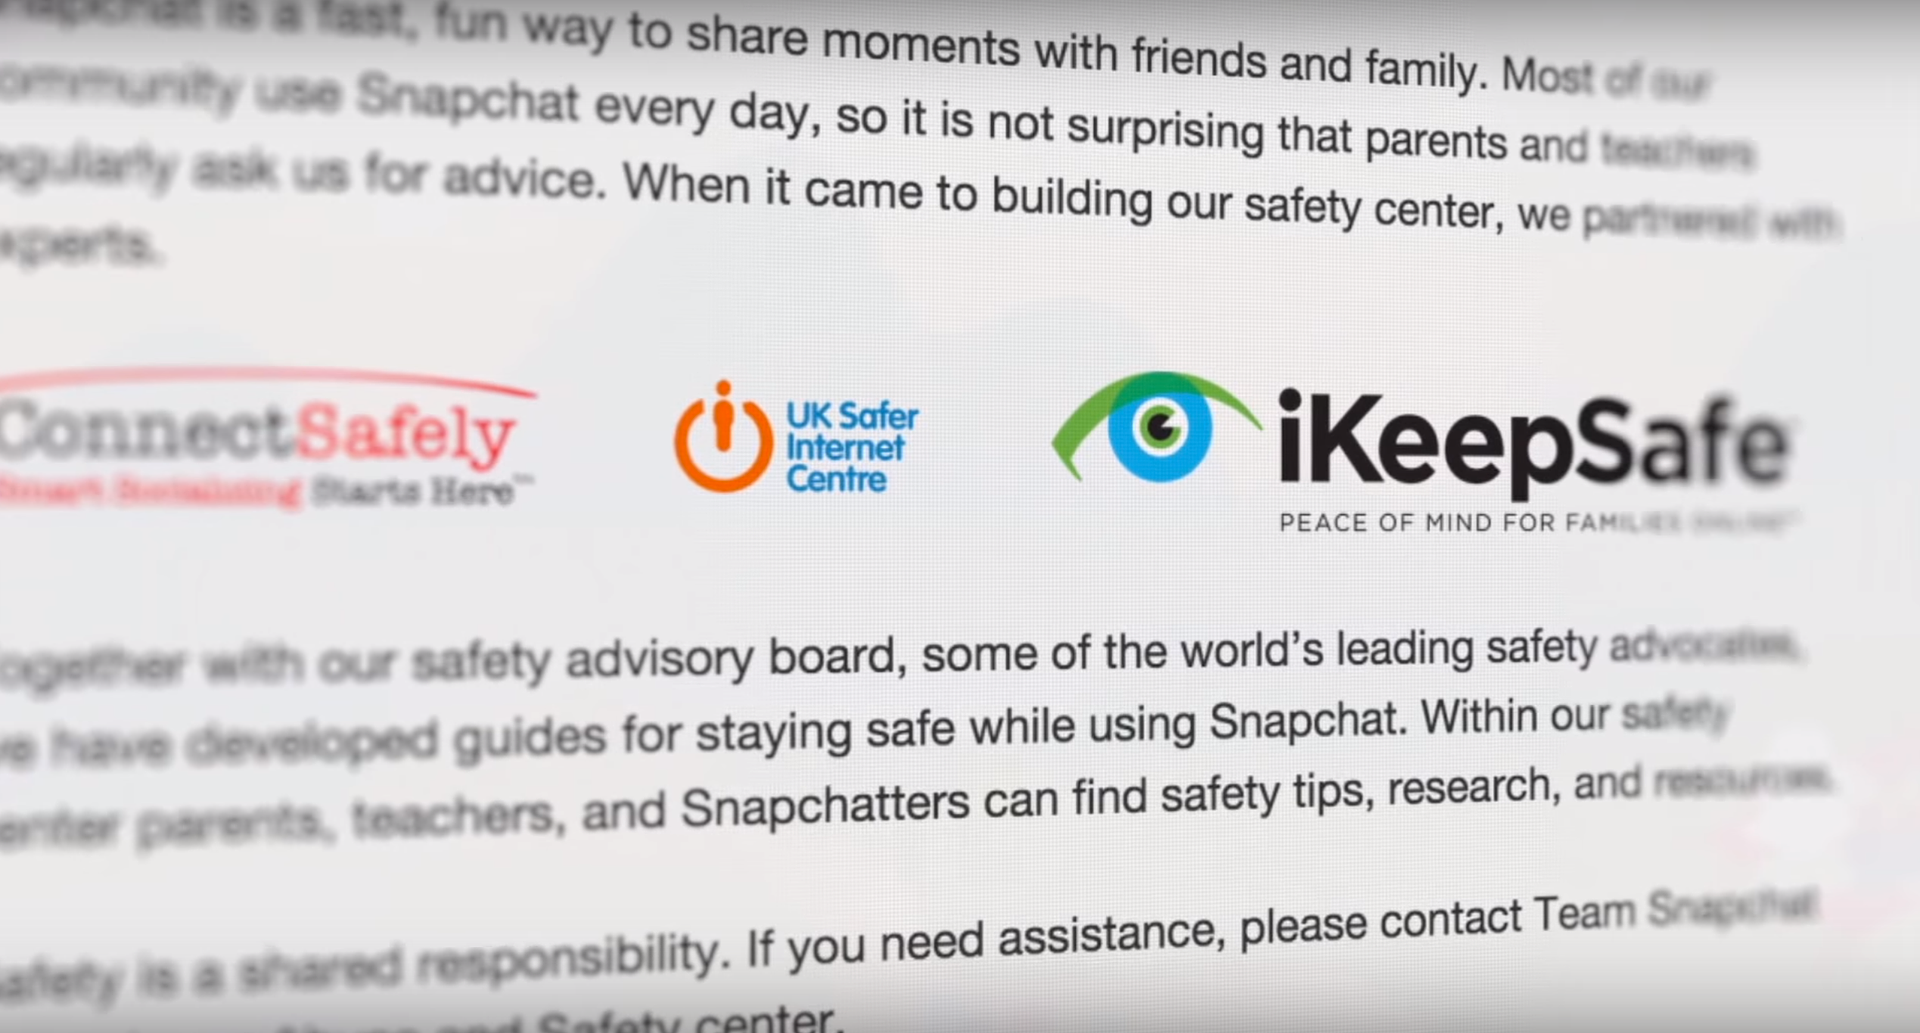 SnapChat Safety Center: Good place for parents to start